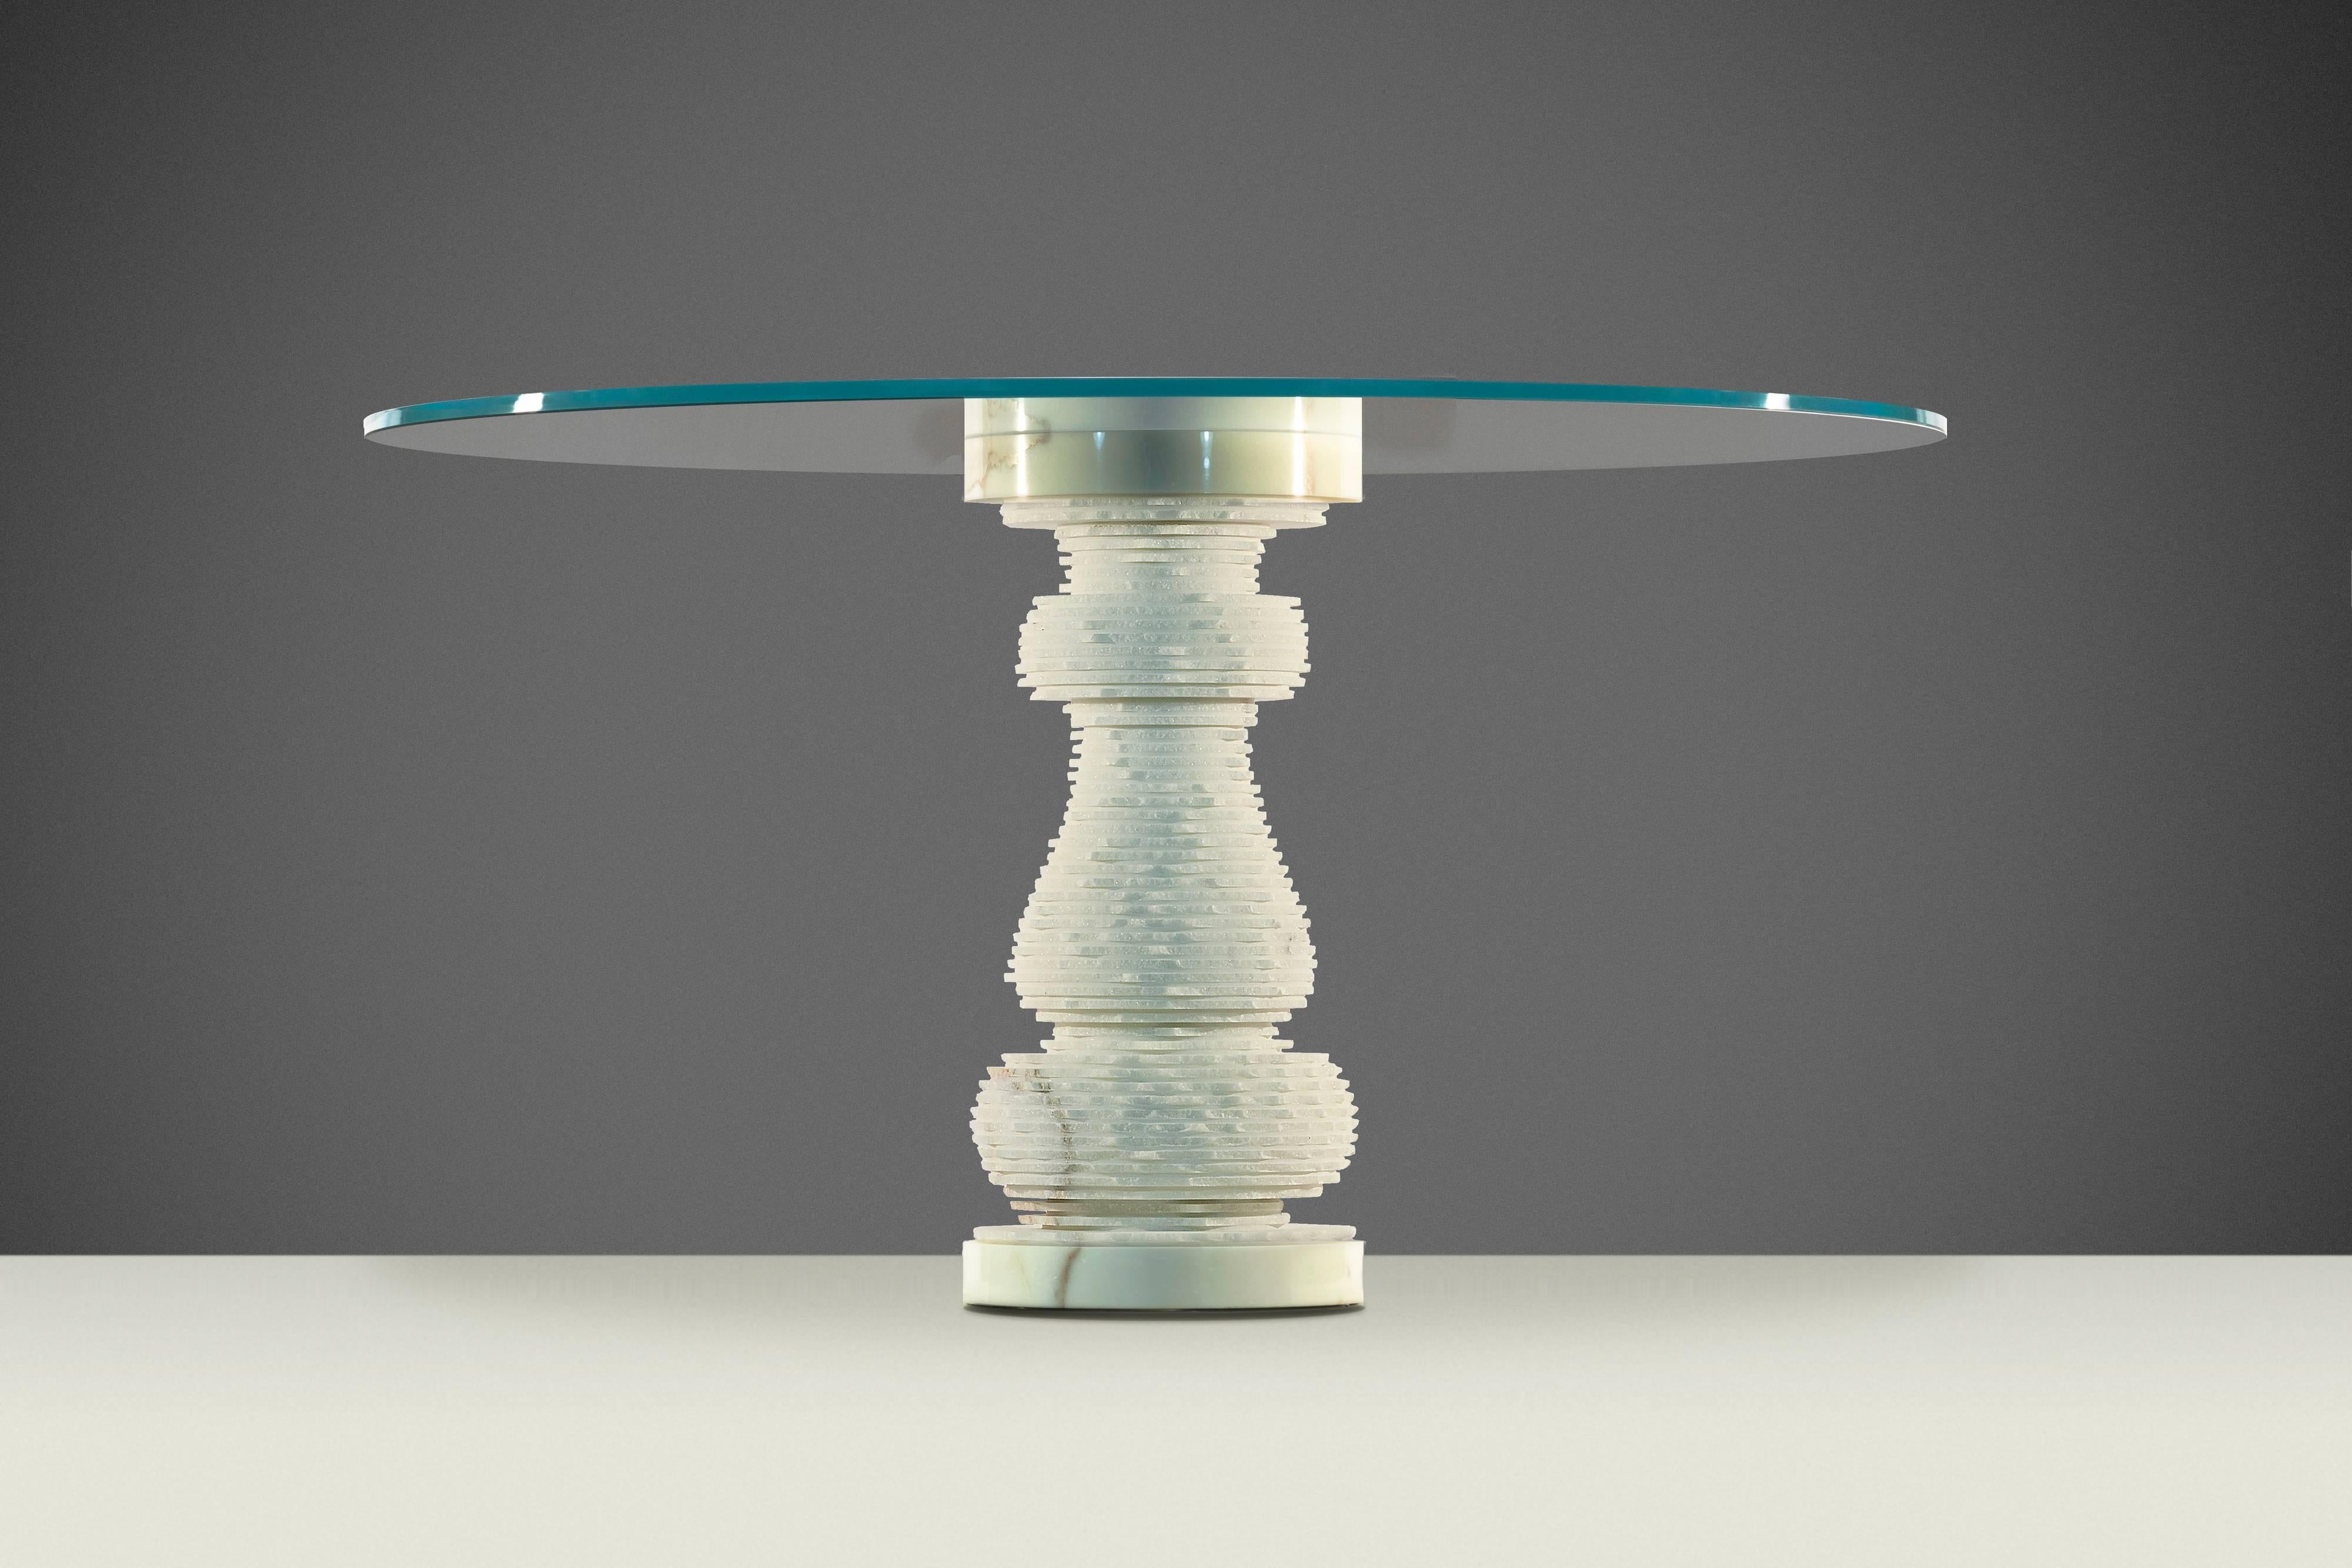 Dining table made by Paolo Ulian and Moreno Ratti. “Introverso” is a table with double soul: you can decide to keep the original cylindrical shape of the leg (modern) or transform it by using a hammer to “break” the thin marble plates forming it in